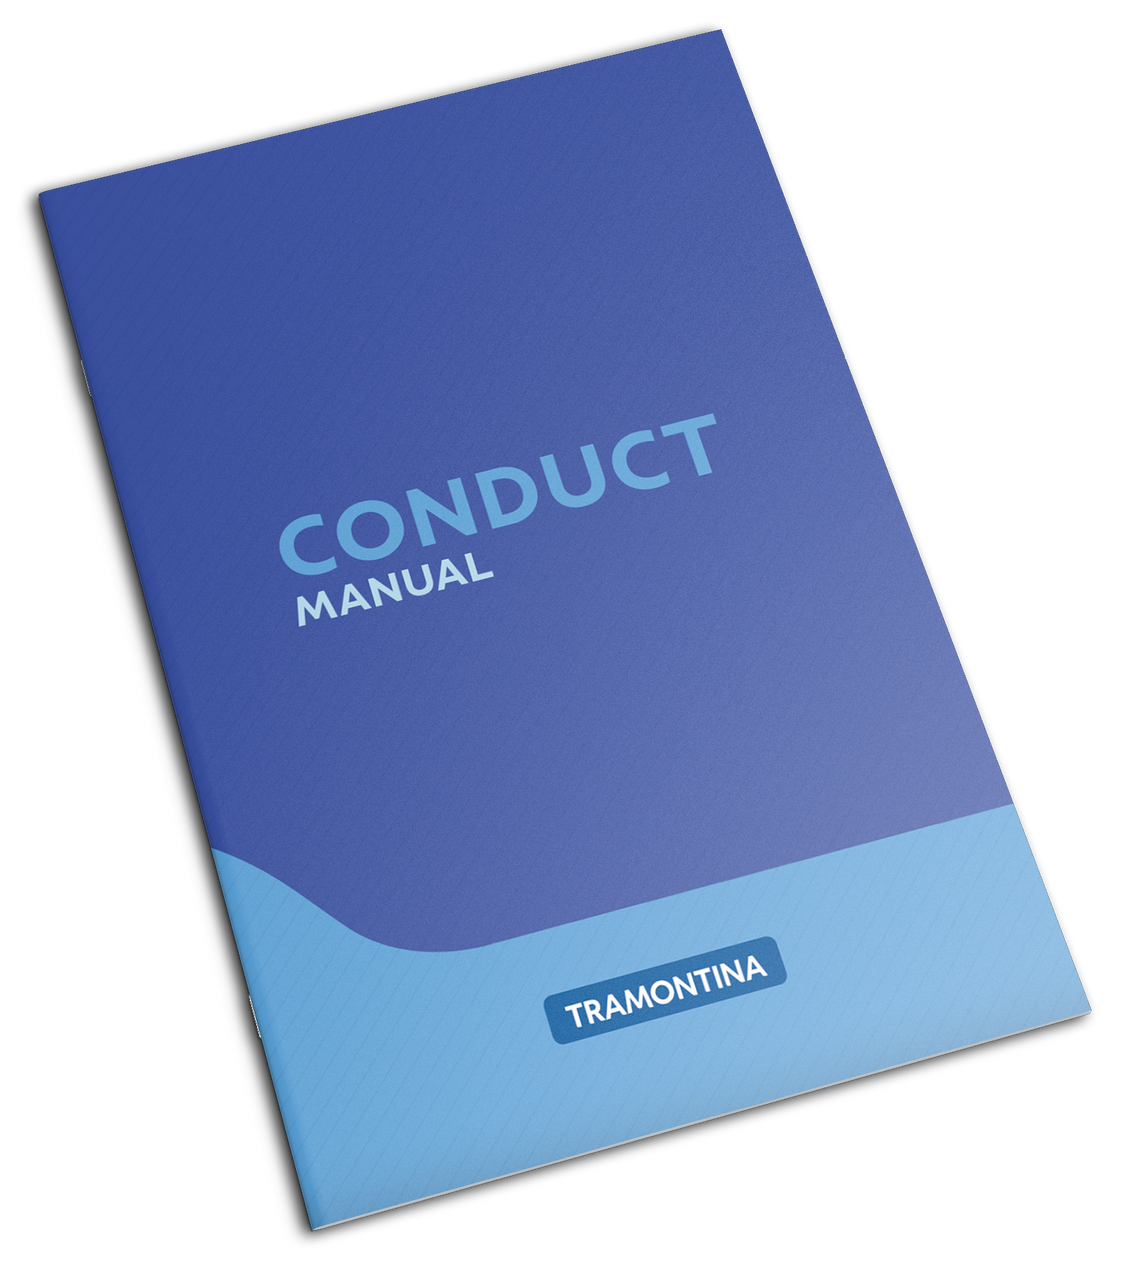 Manual in shades of blue with the words “Conduct Manual”. 